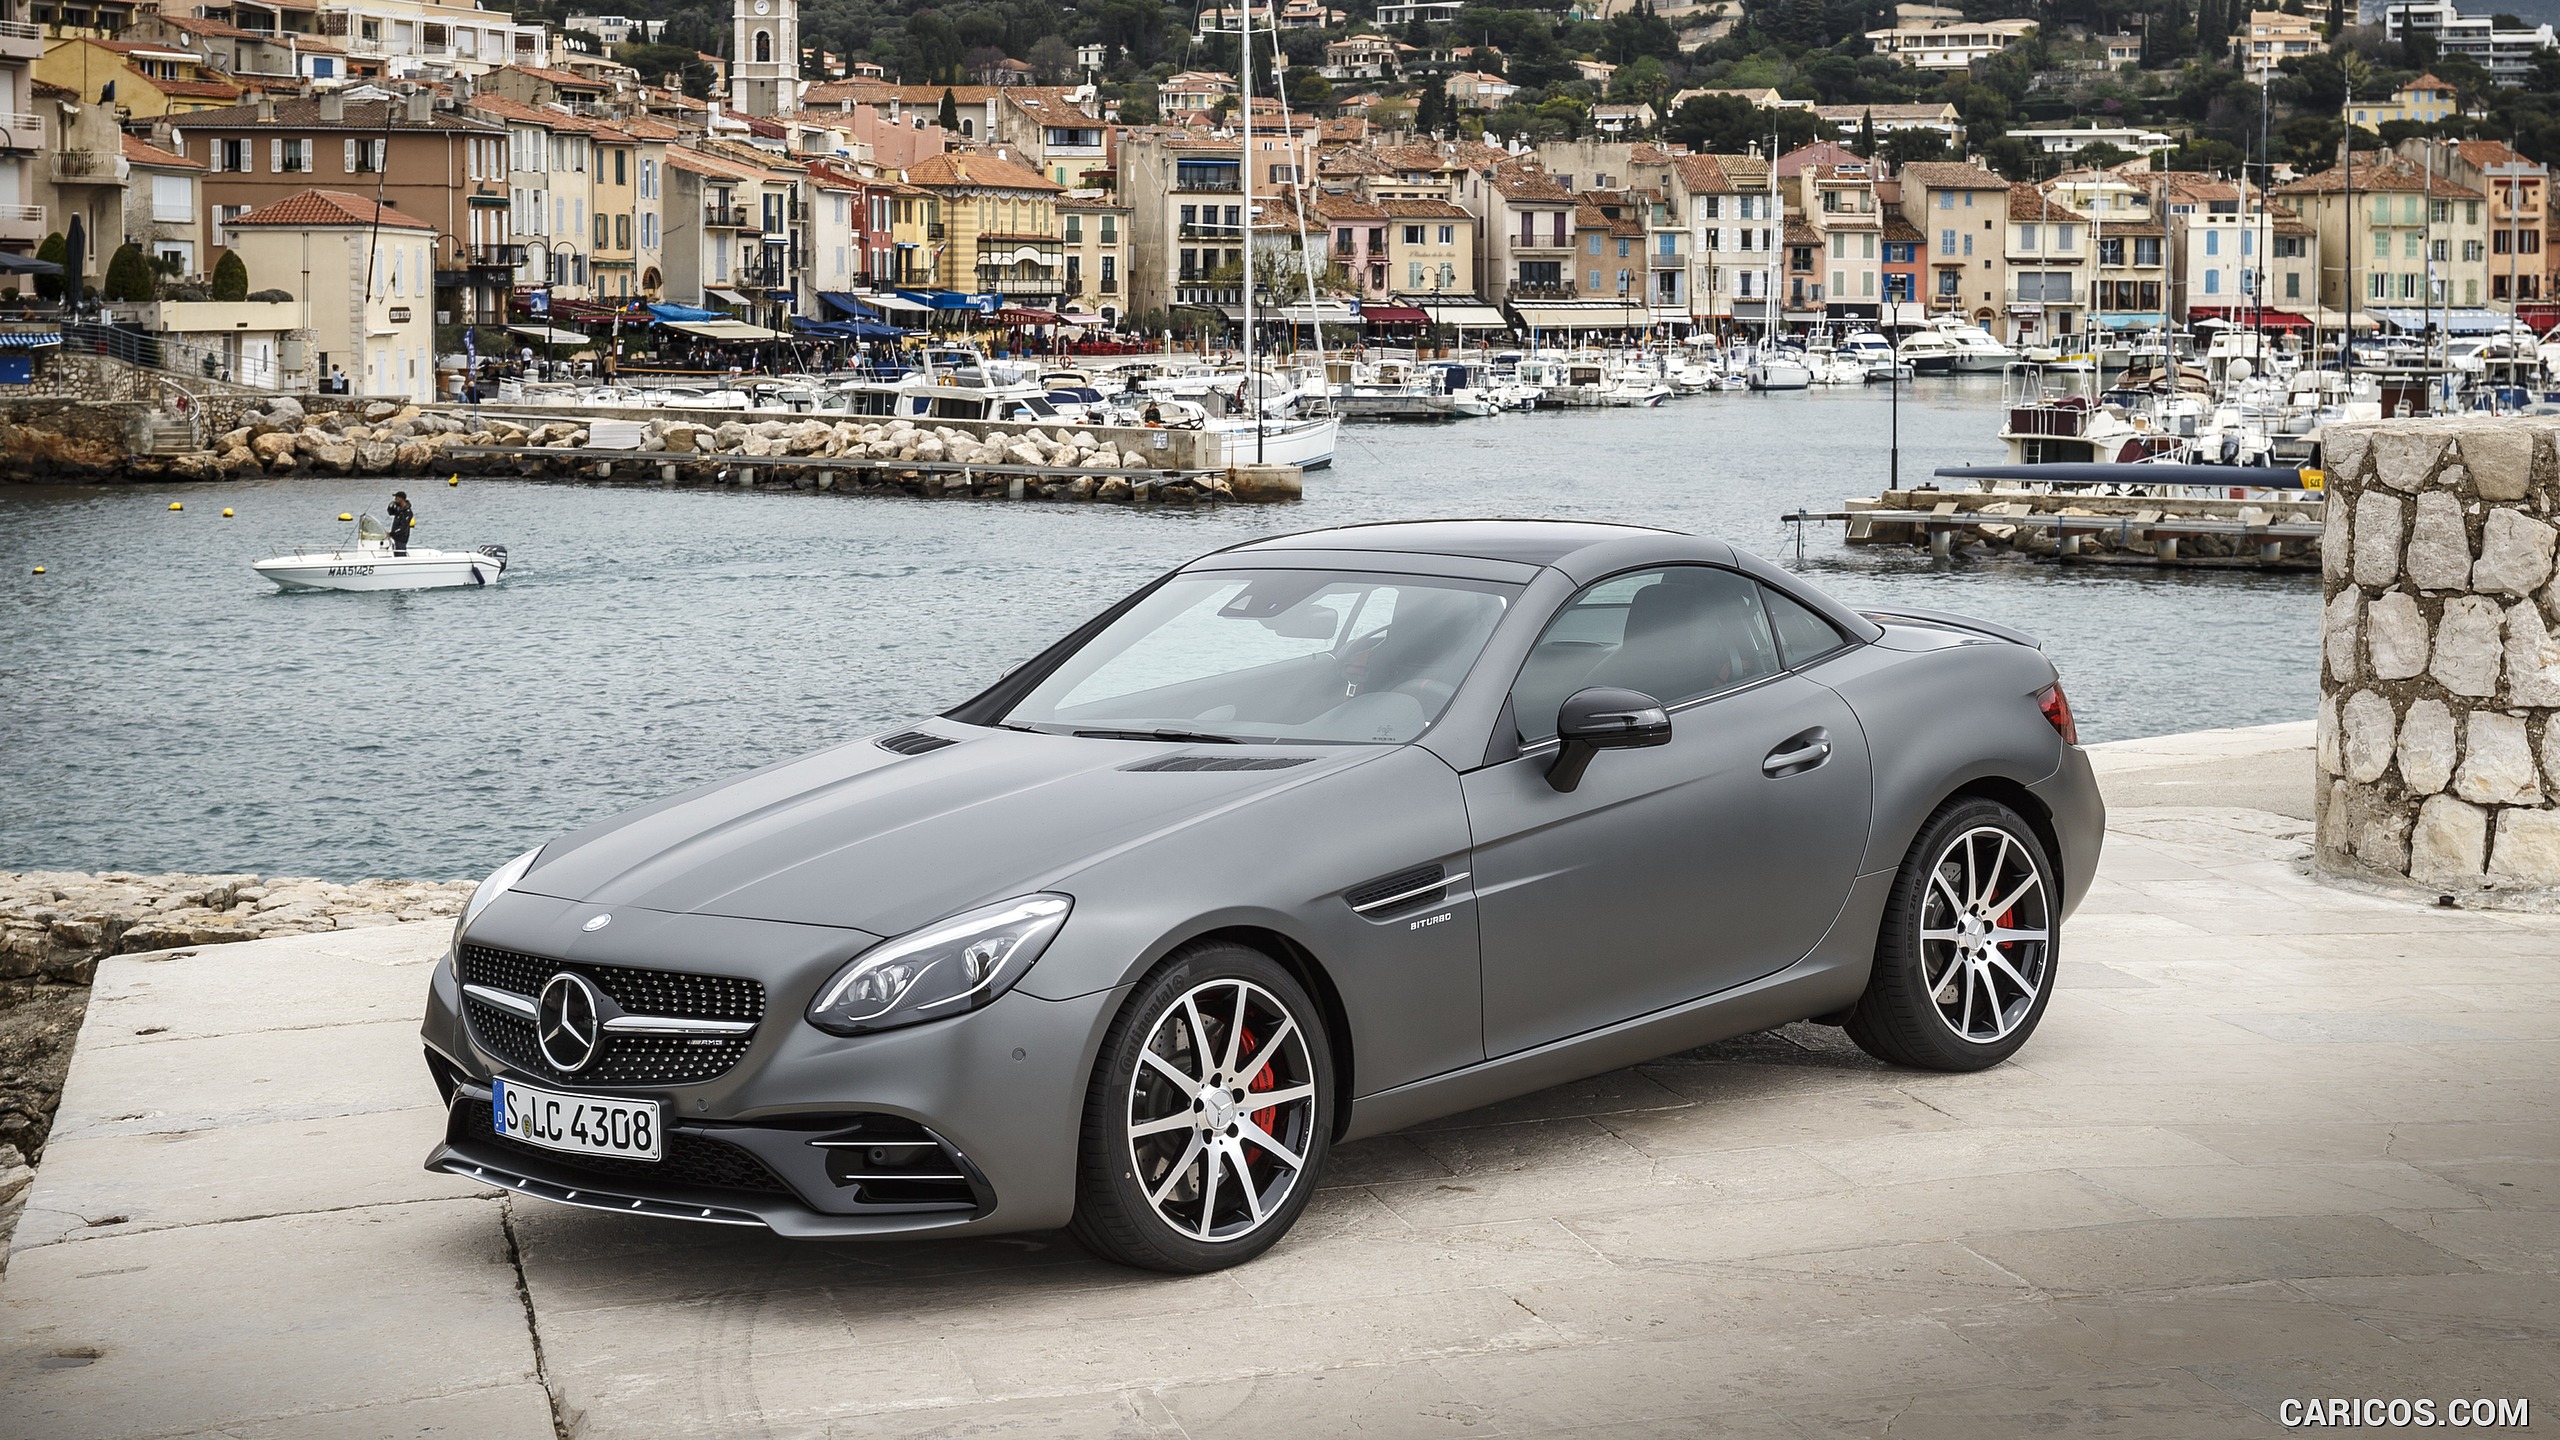 2017 Mercedes-AMG SLC 43 - Top Closed - Front, #25 of 92